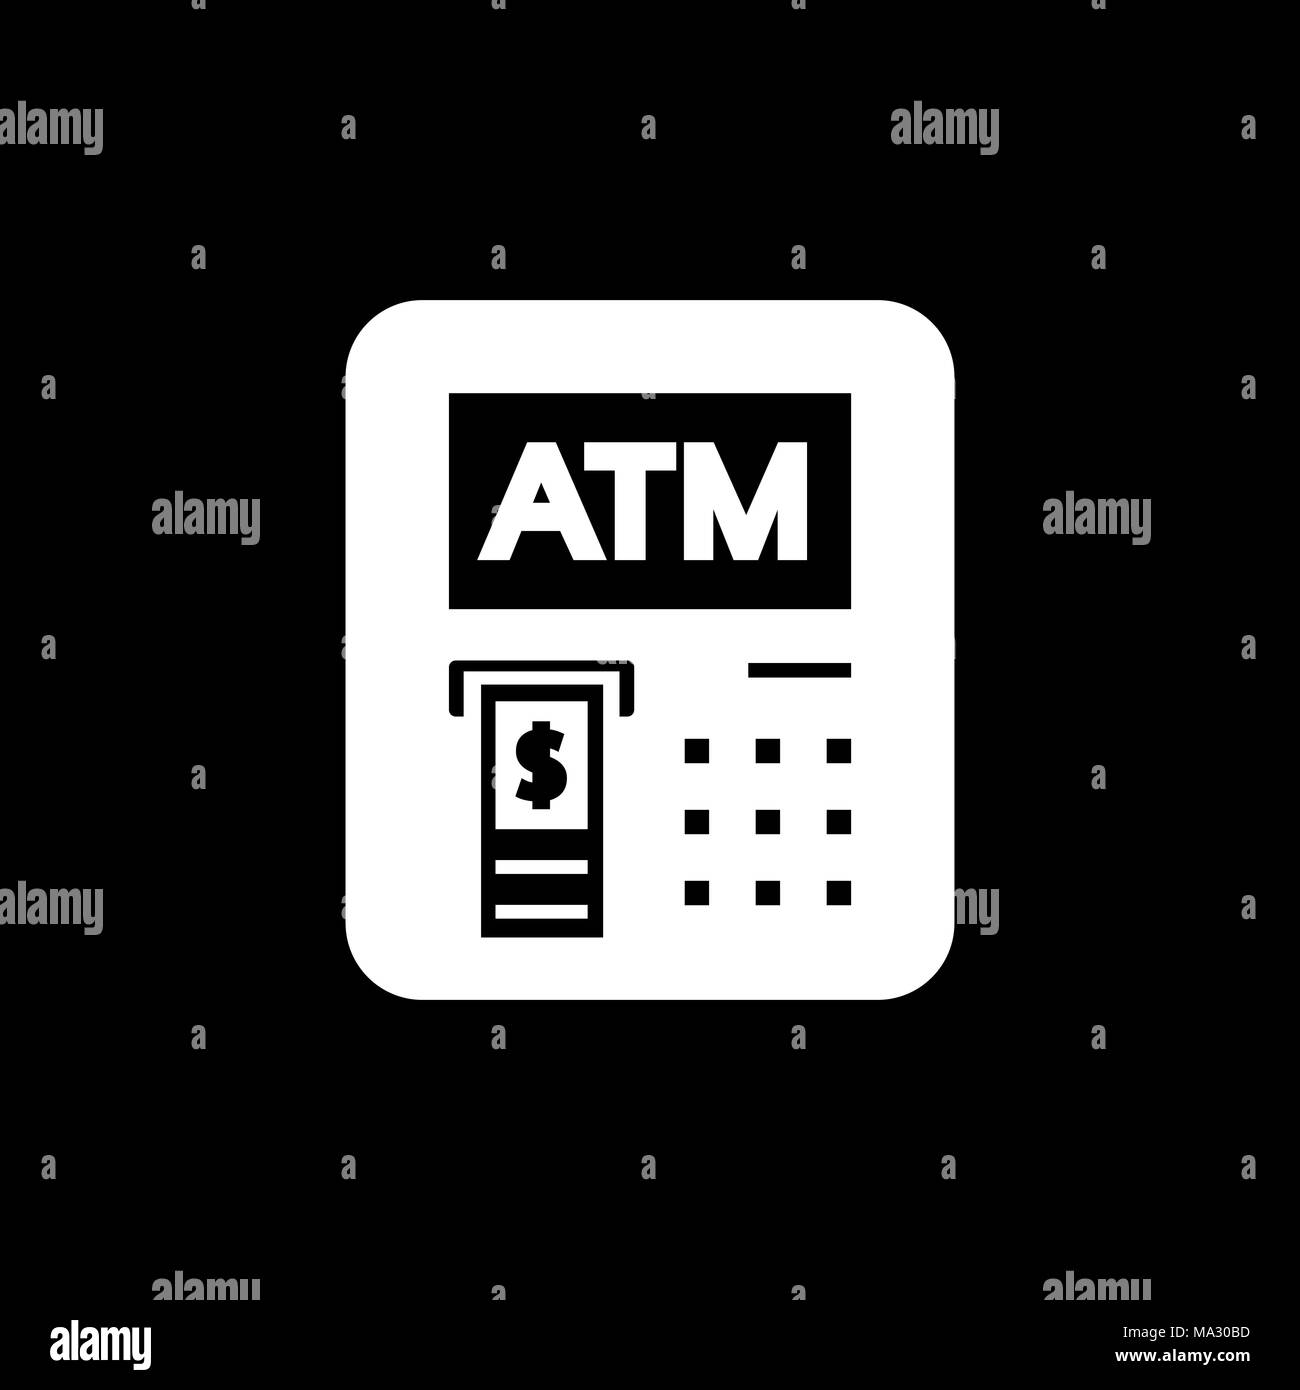 ATM icon flat style simple vector illustration. Stock Vector